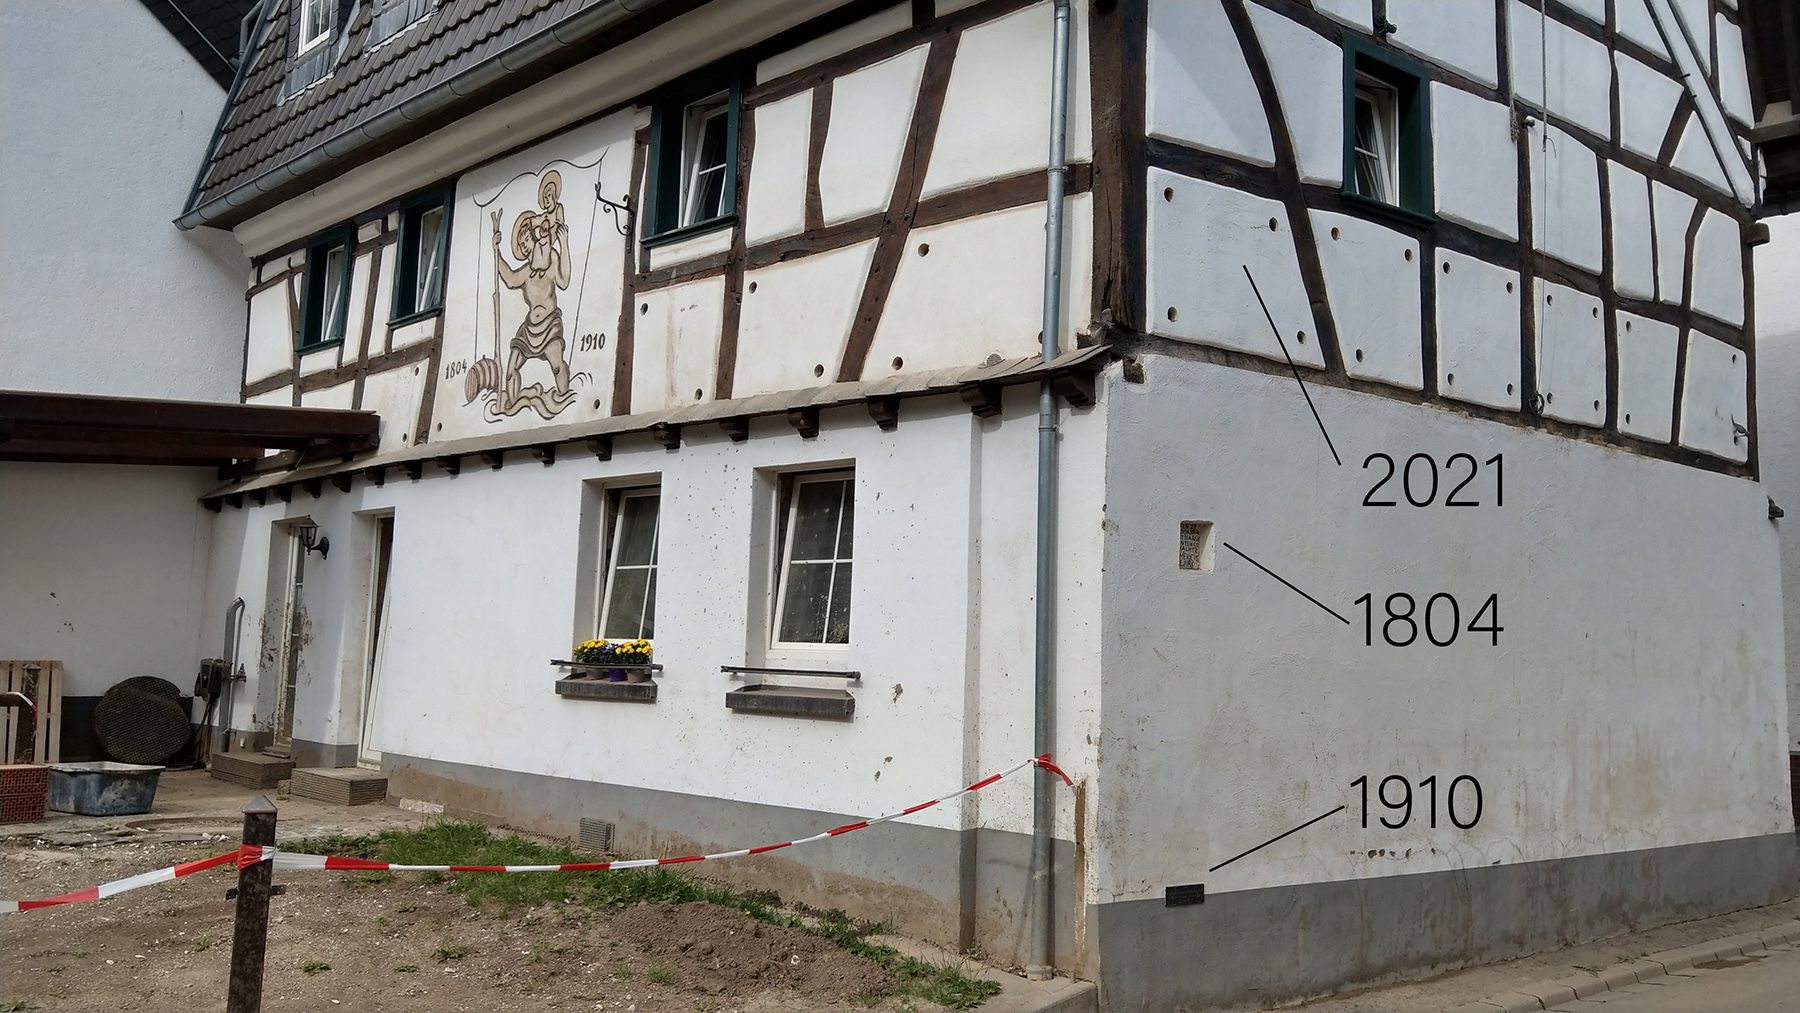 The Ahr Valley is no stranger to flooding events. This house in Walporzheim, Germany, shows the high-water levels of past floods.  (Photograph courtesy of University of Göttingen/Michael Dietze)